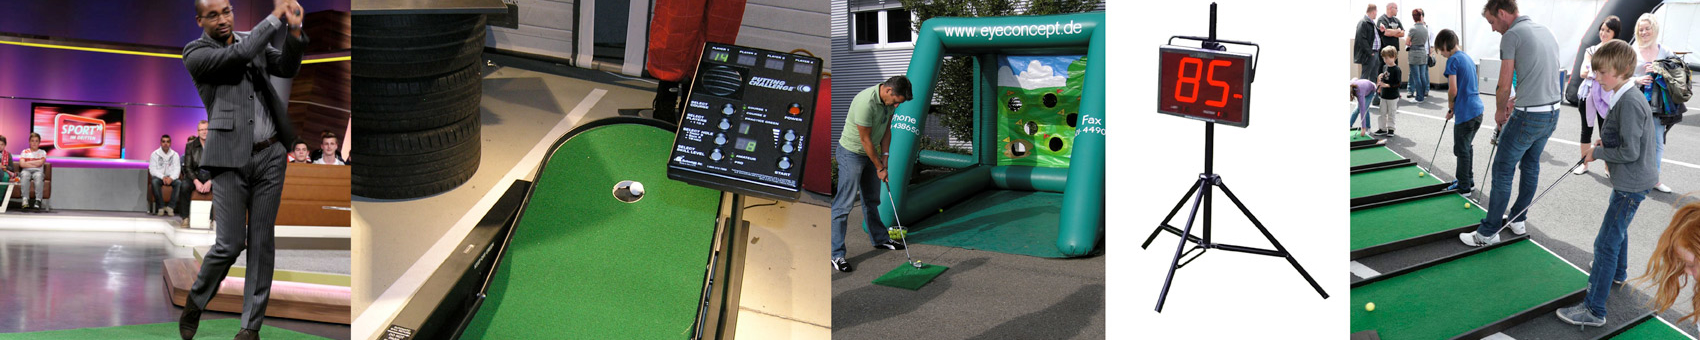 Golf - wherever you want!